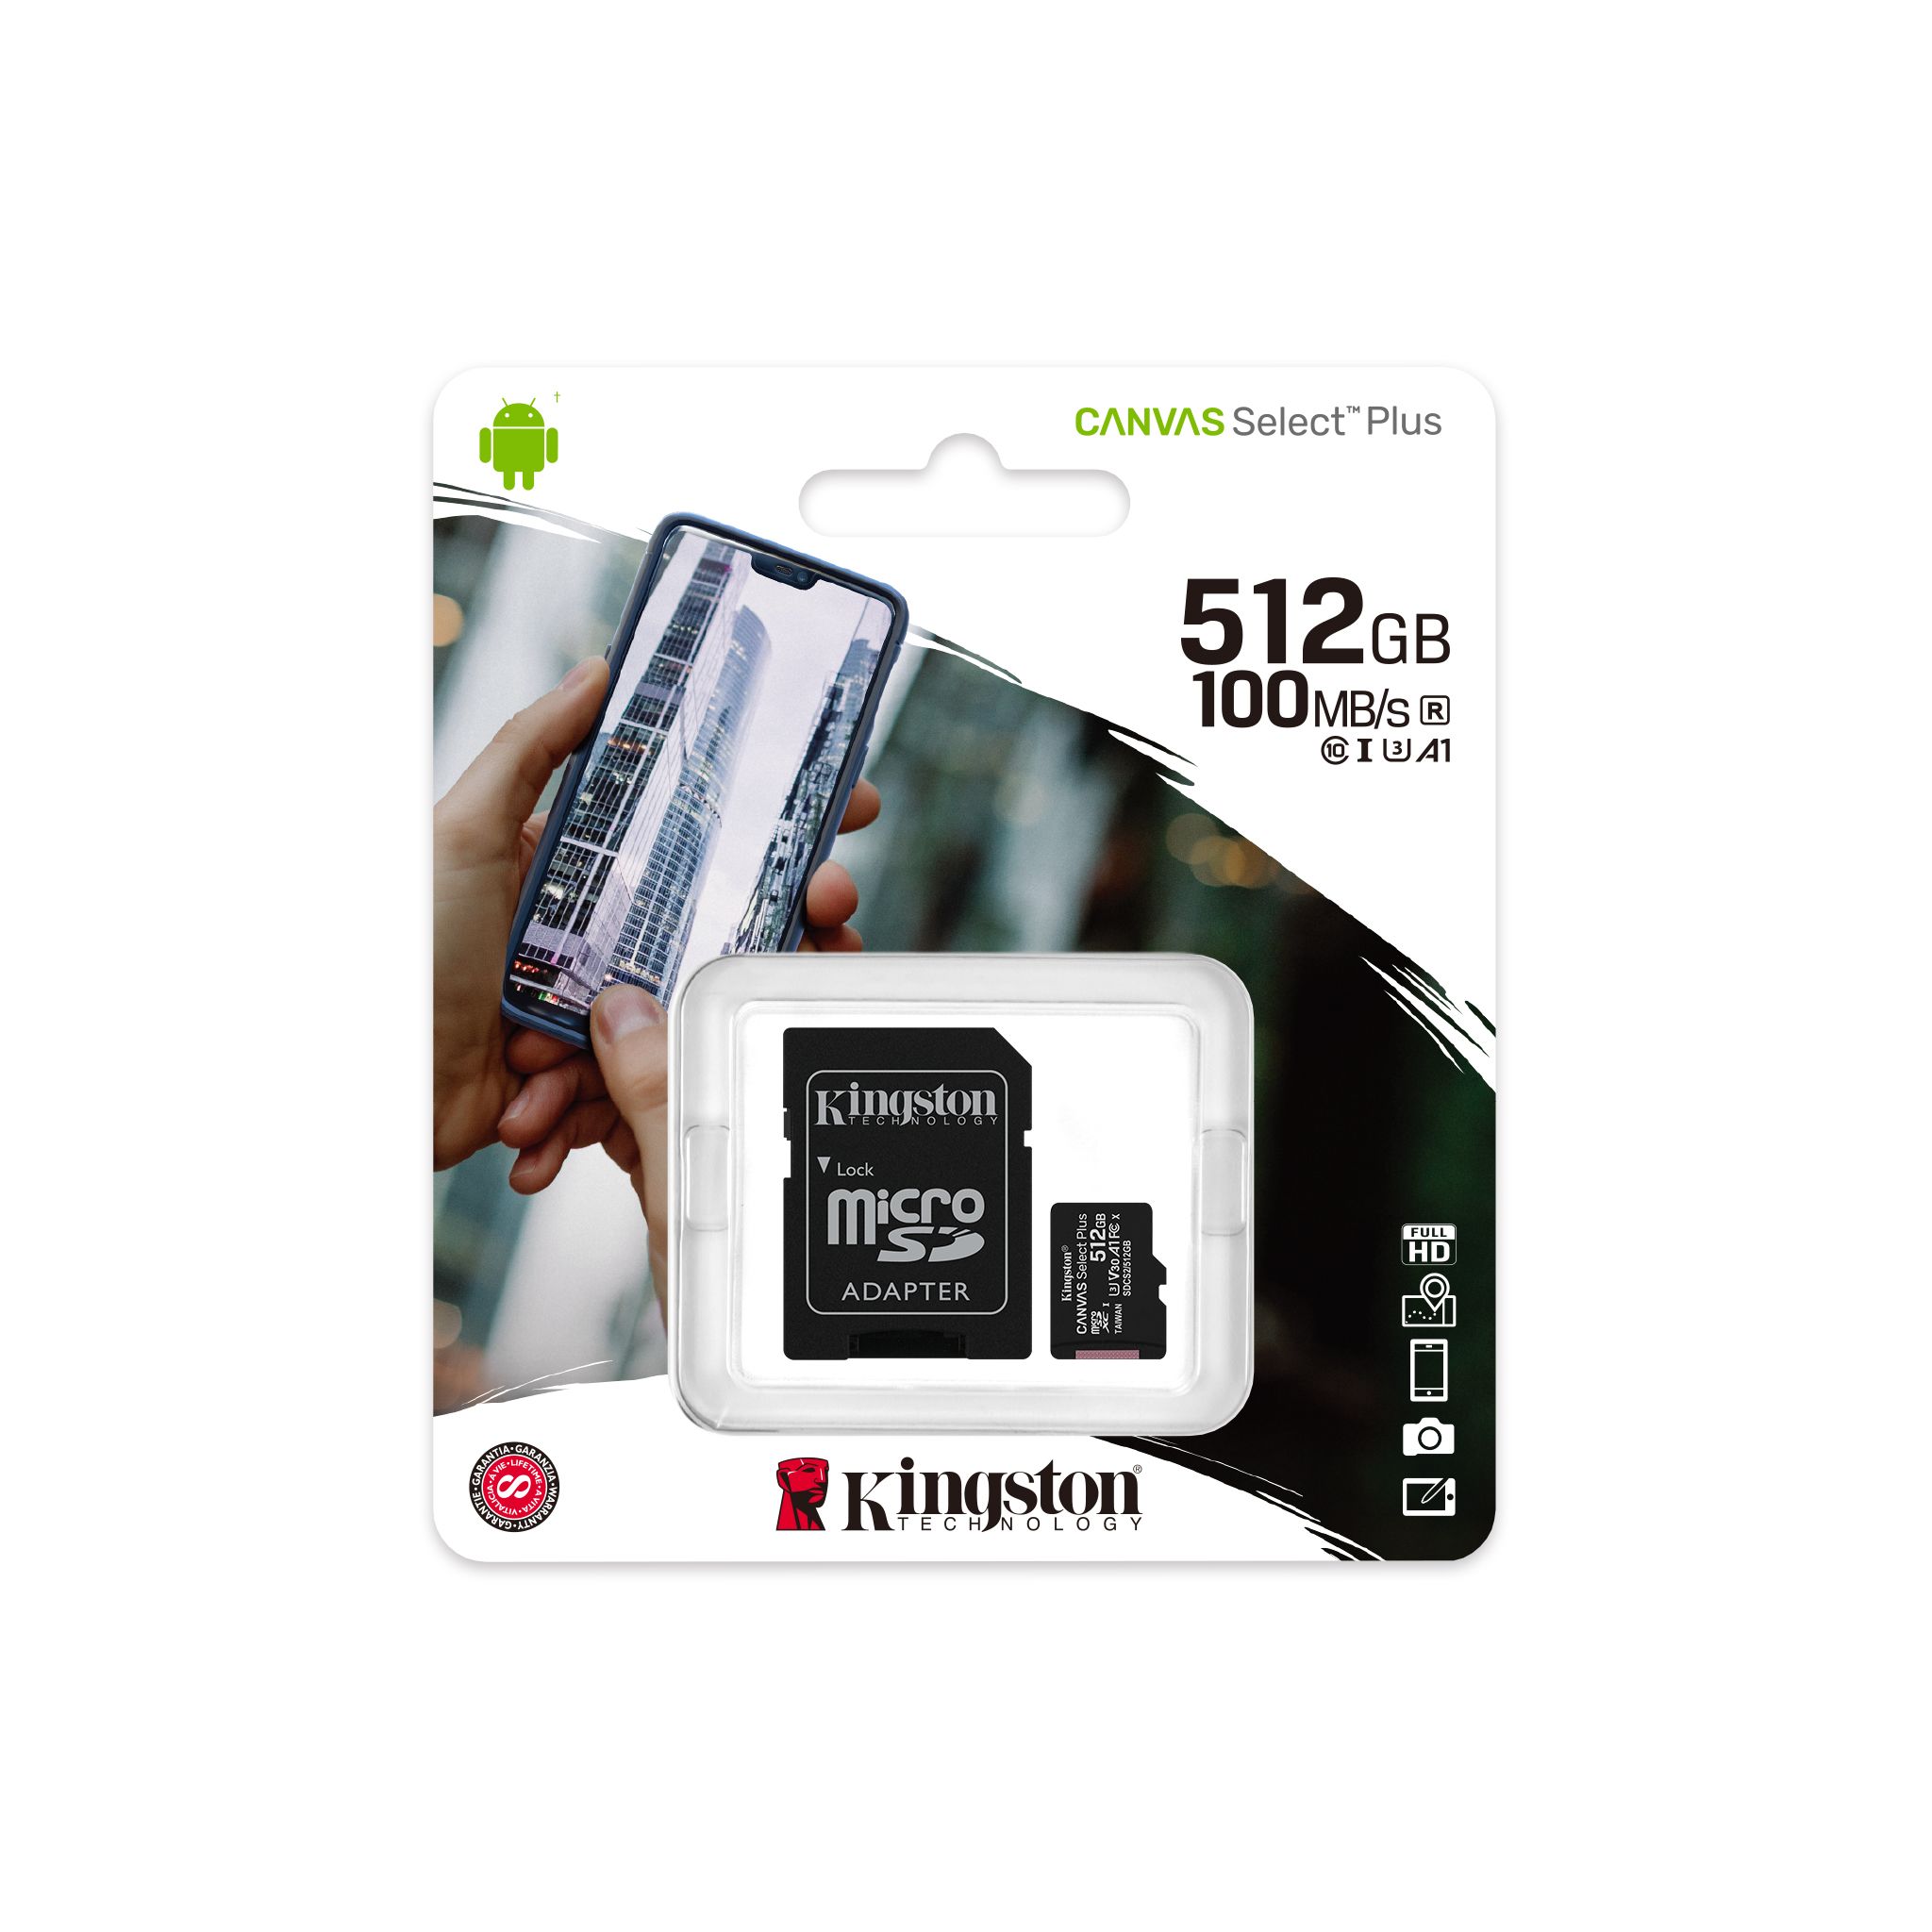 Kingston 512GB Verykool Spark LTE SL5011 MicroSDXC Canvas Select Plus Card Verified by SanFlash. 100MBs Works with Kingston 